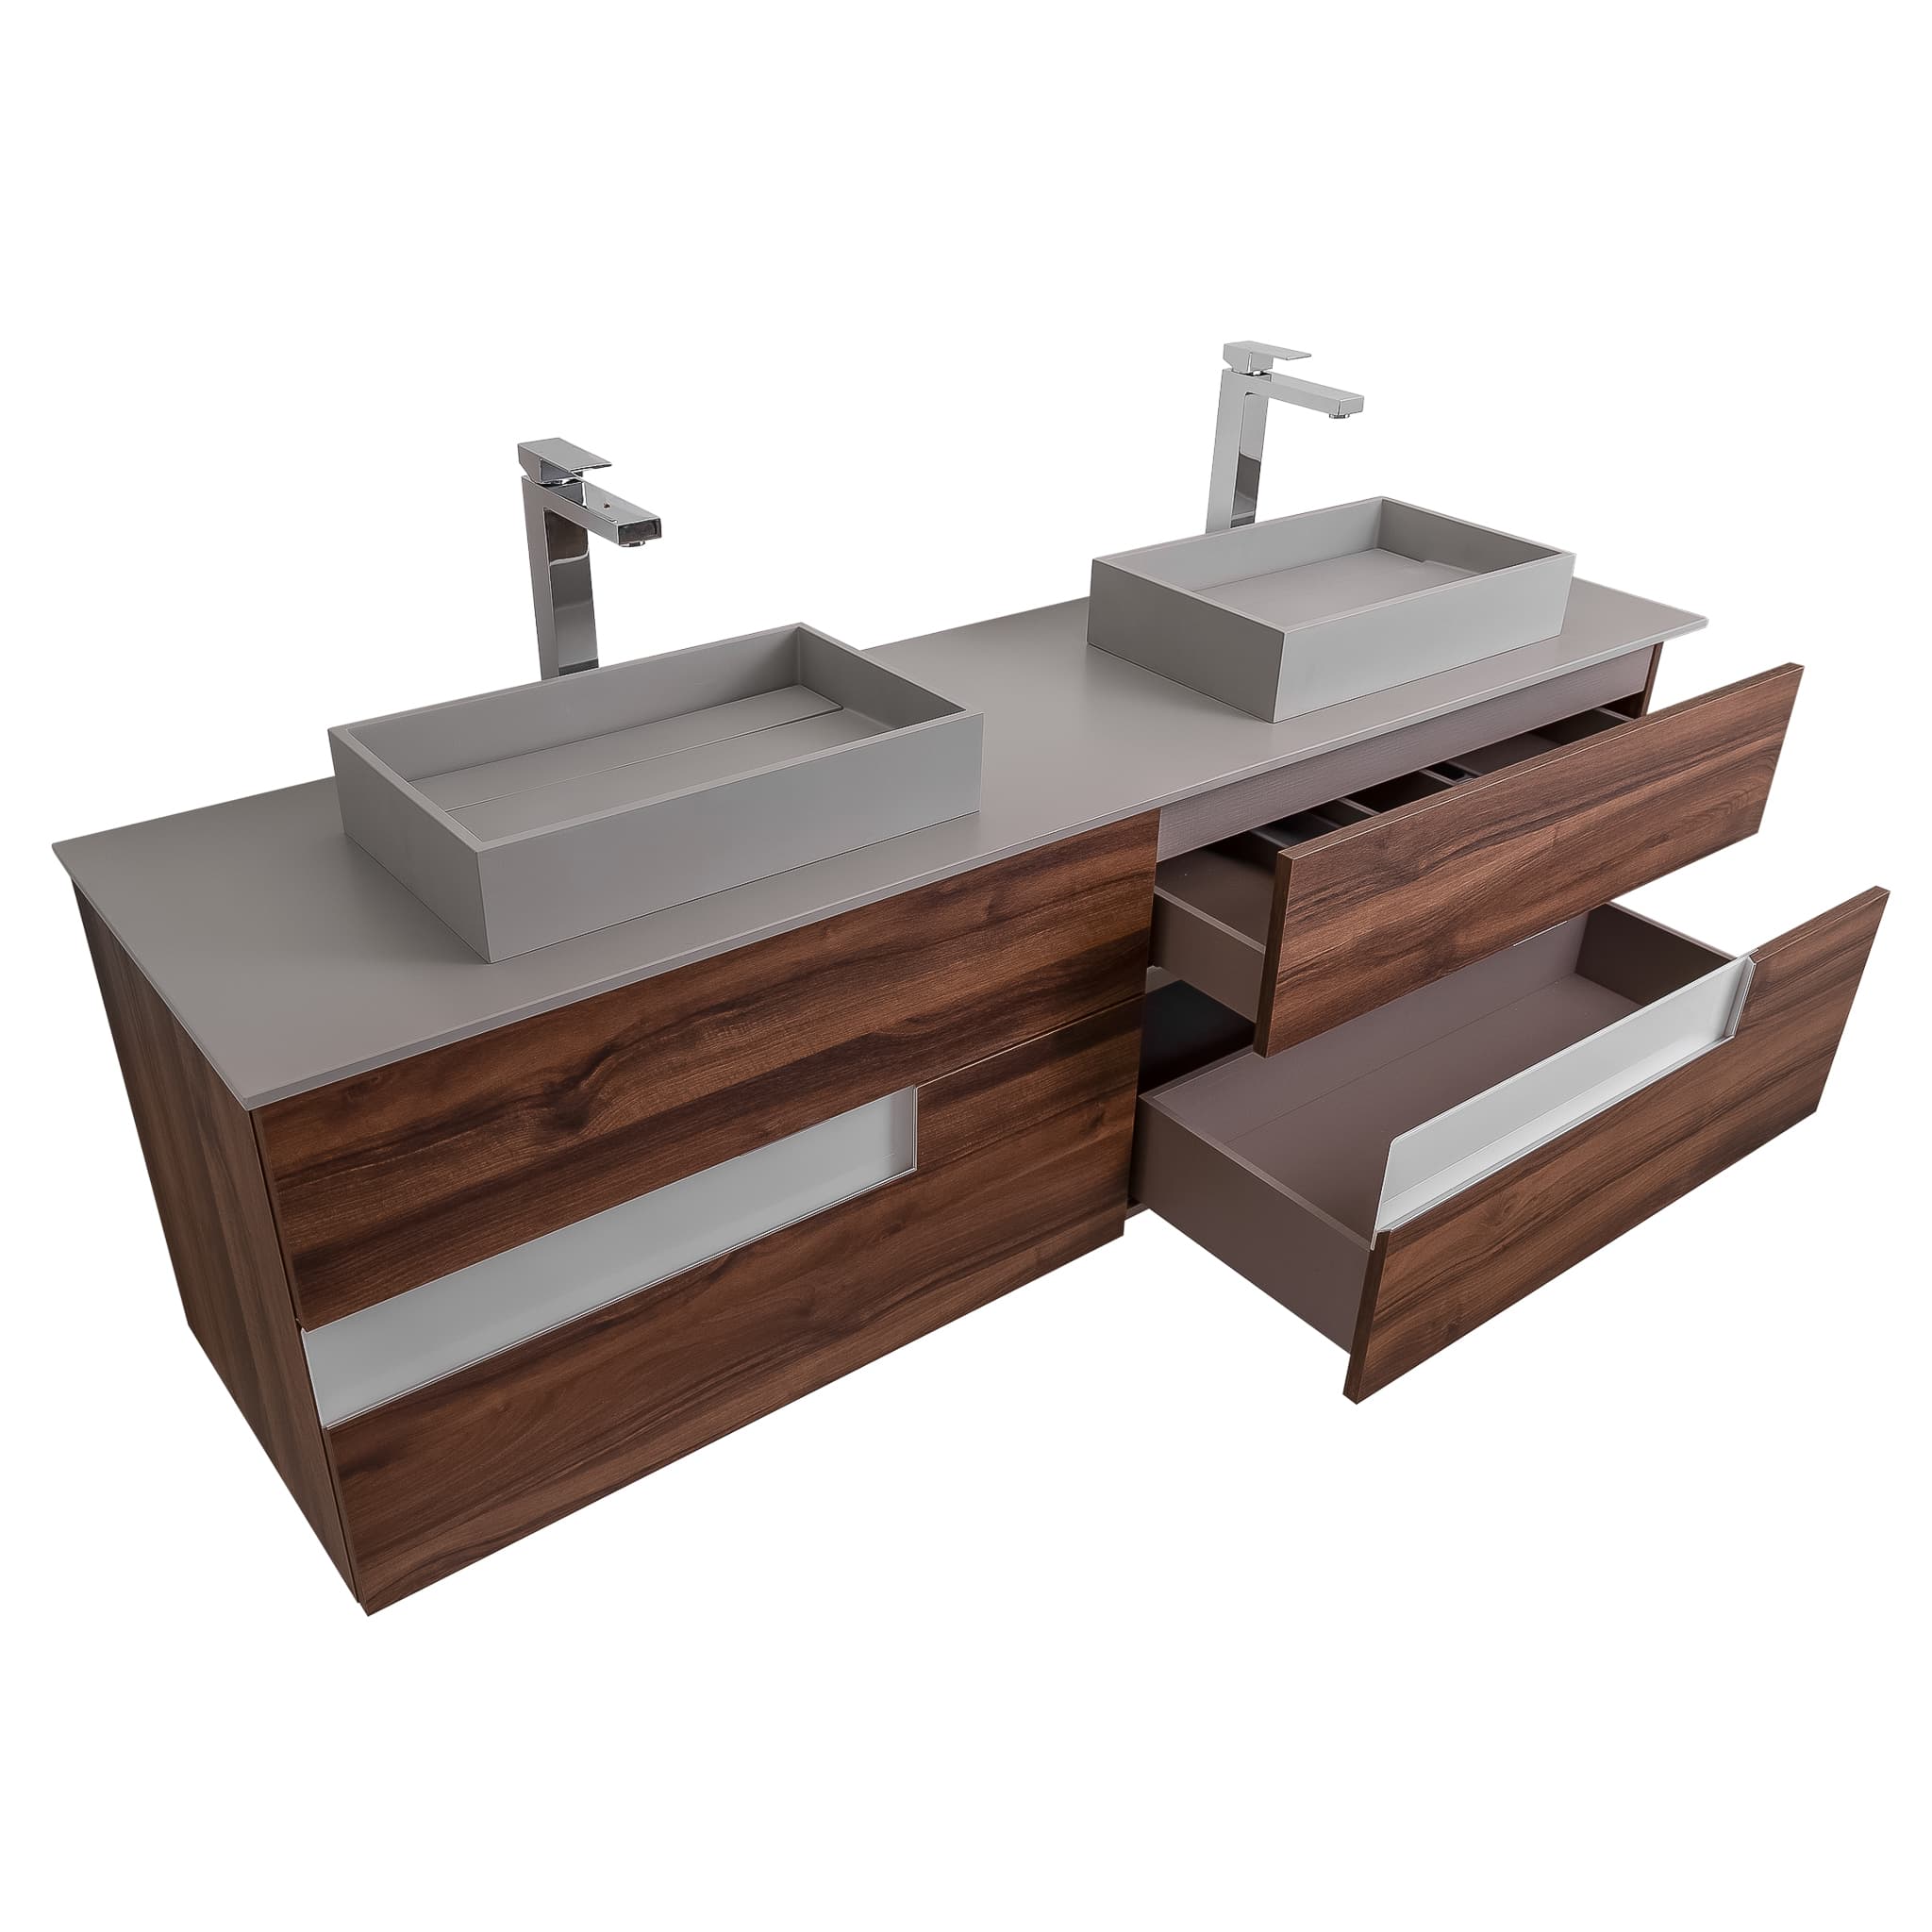 Vision 63 Valenti Medium Brown Wood, Solid Surface Flat Grey Counter And Two Infinity Square Solid Surface Grey Basin 1329, Wall Mounted Modern Vanity Set